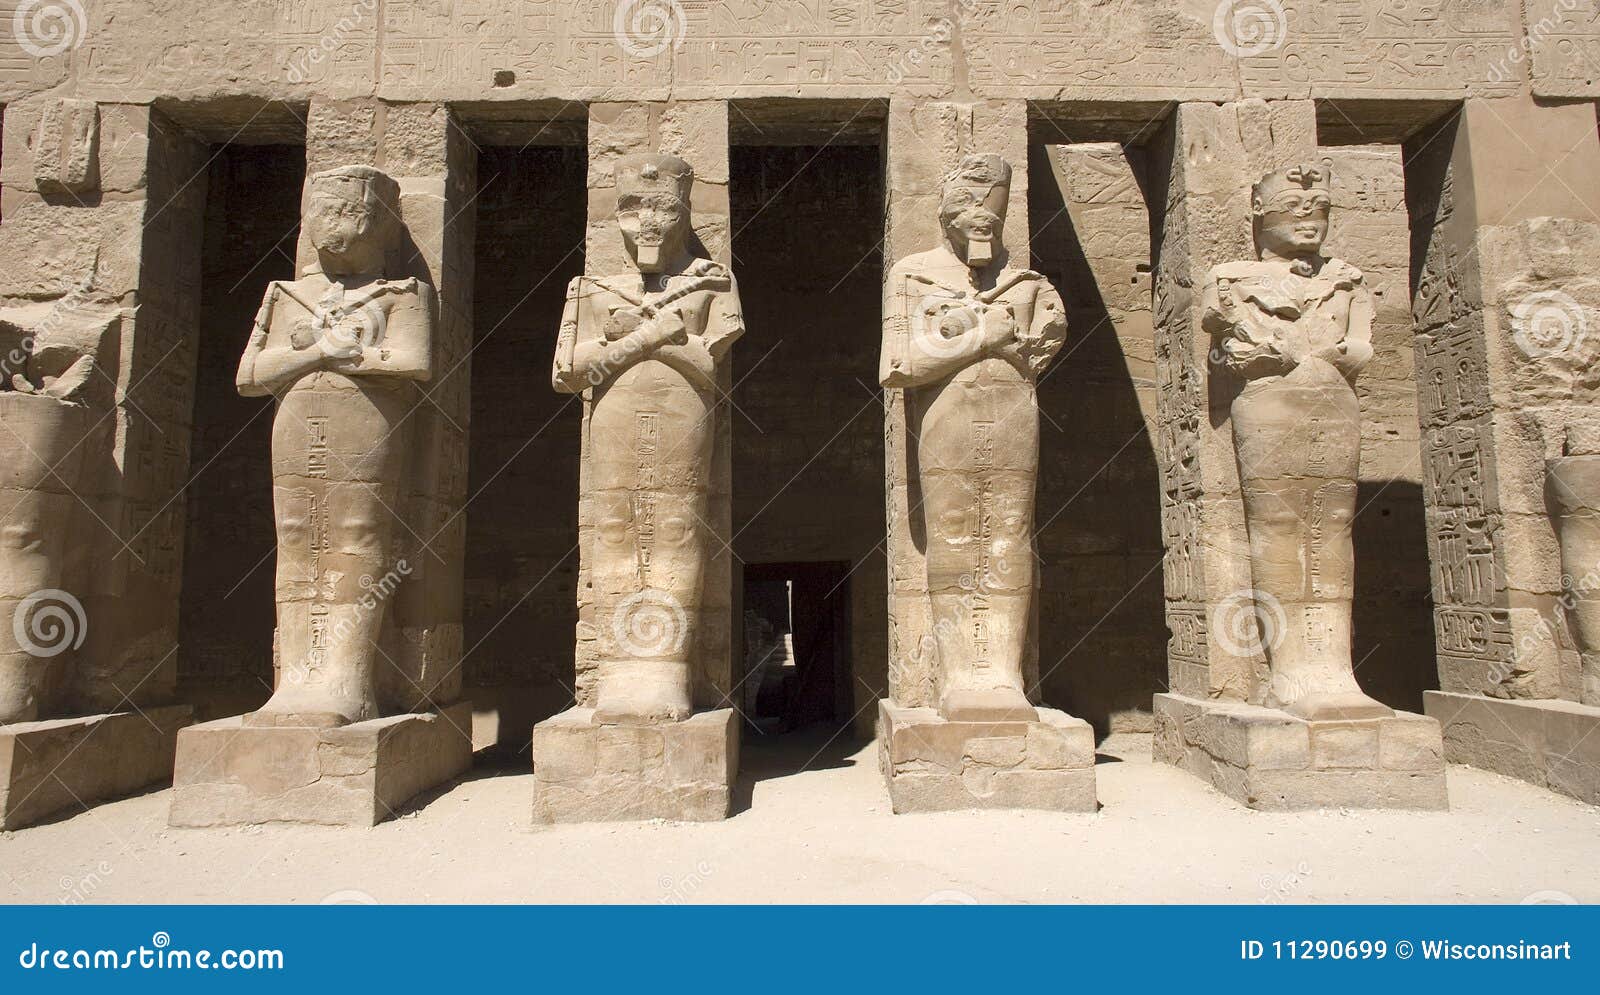 temple of karnak statues, ancient egypt, travel